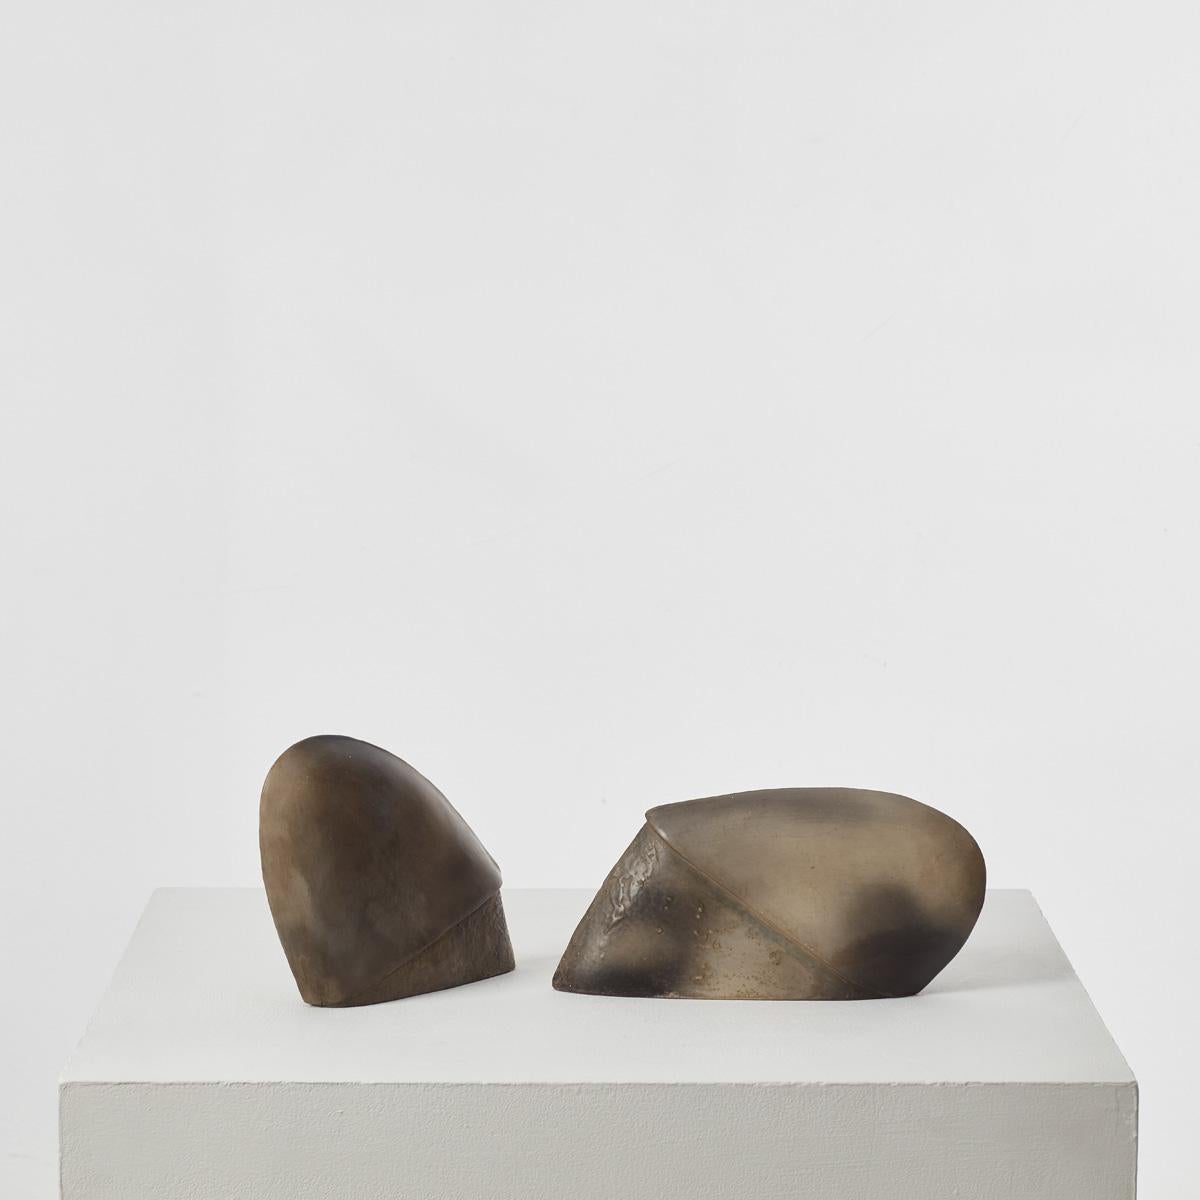 A grouping of two abstract sculptures with gently rhythmic, biomorphic forms, previously owned by Sir Terence Conran (1931 - 2020). Conran, an inimitable design pioneer and businessman, “did more than anyone to enhance material life in Britain